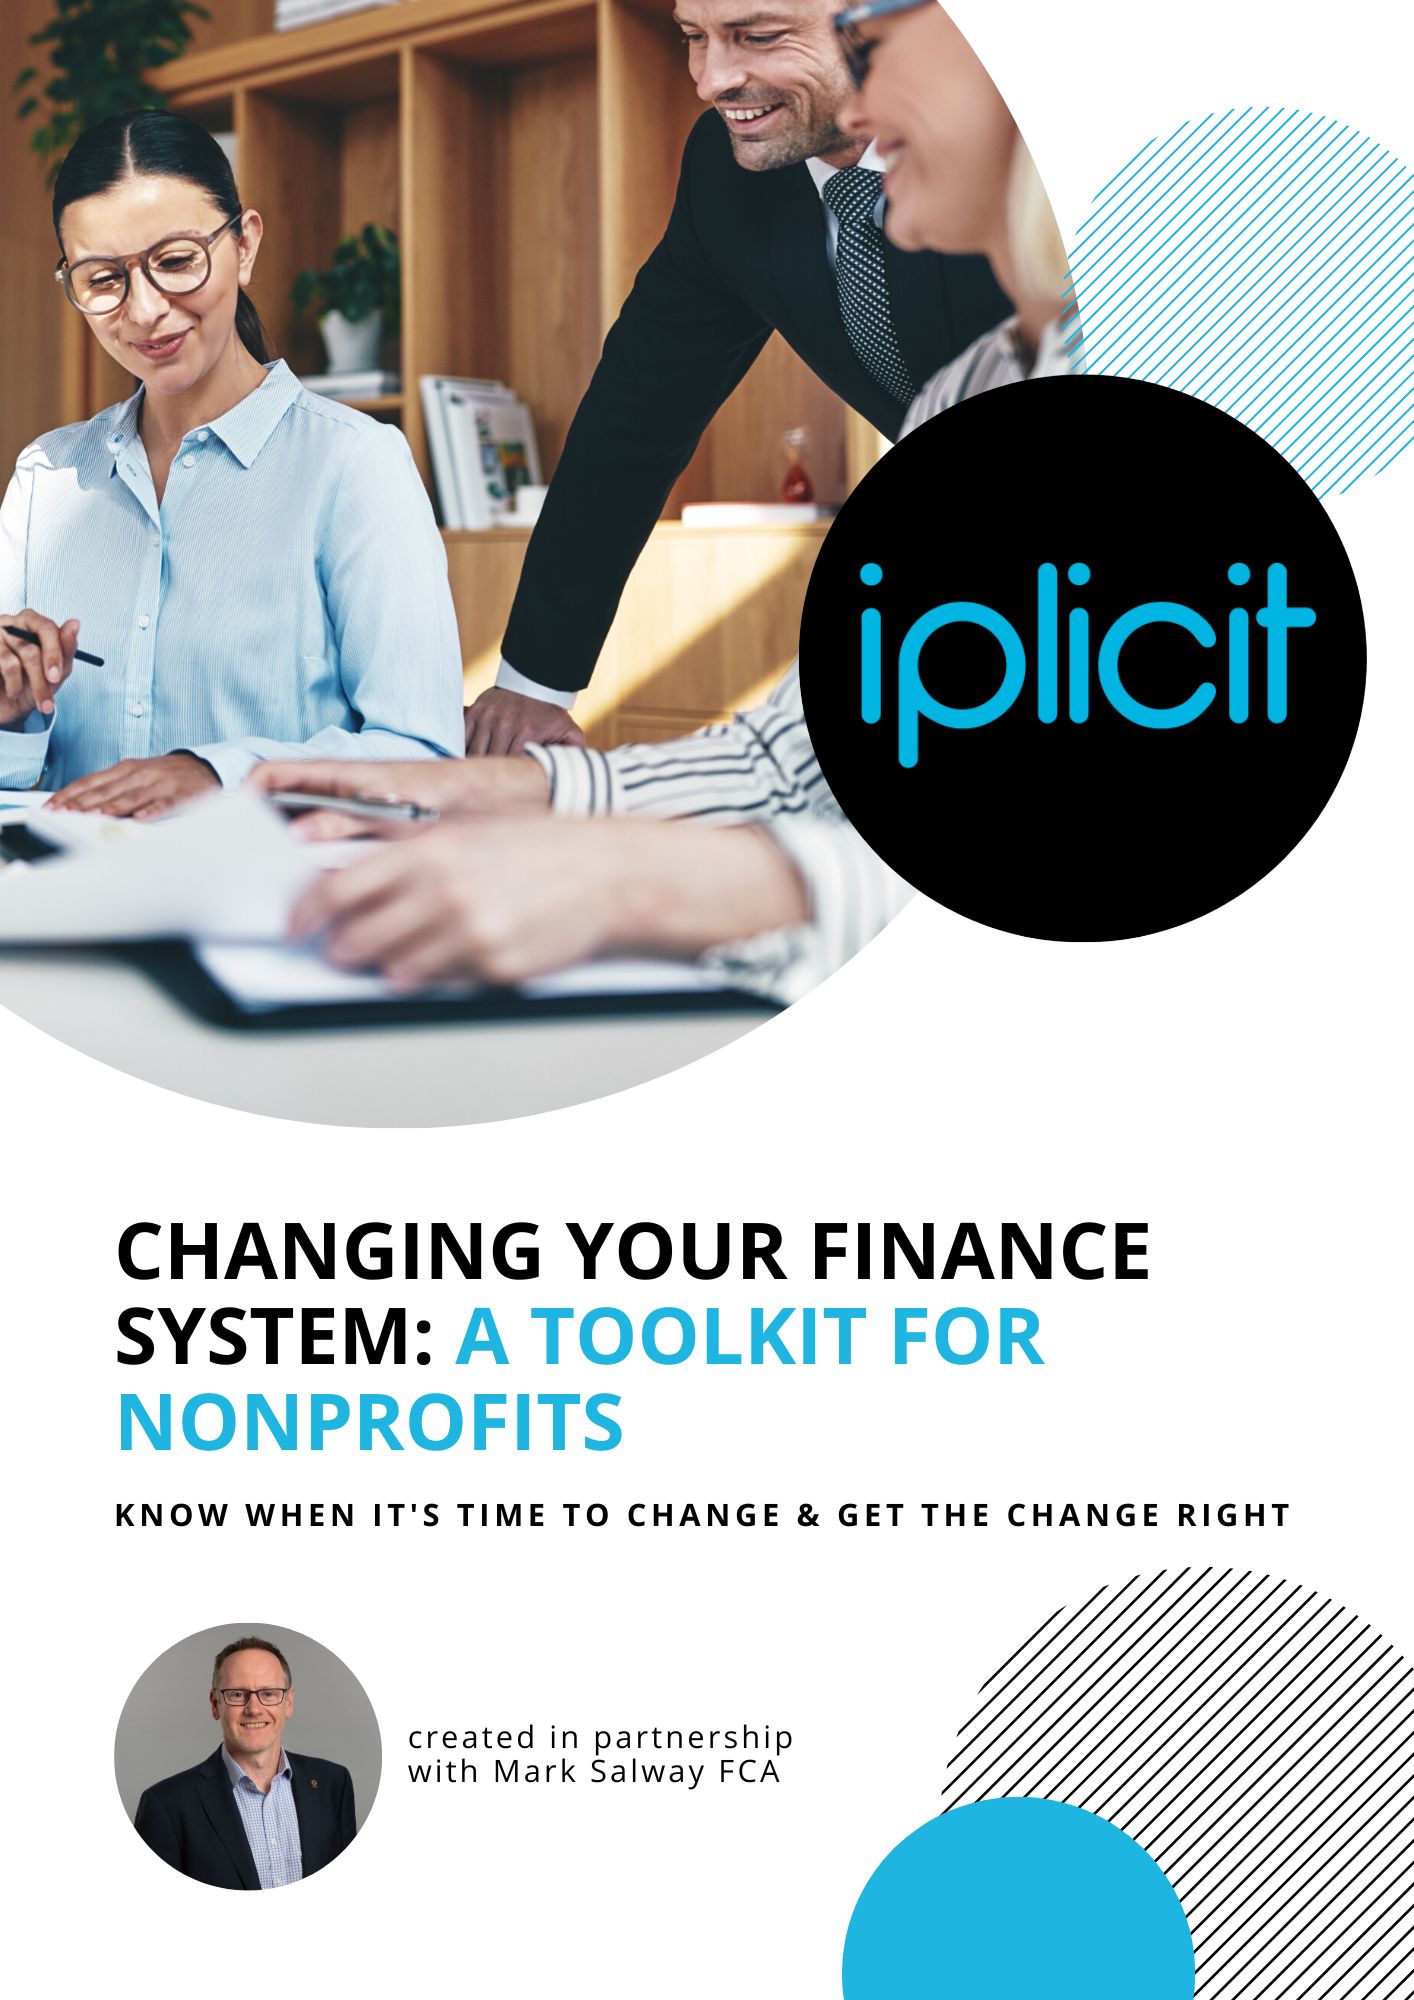 Guide - iplicit Nonprofit Toolkit with Mark Salway - Changing your Finance System